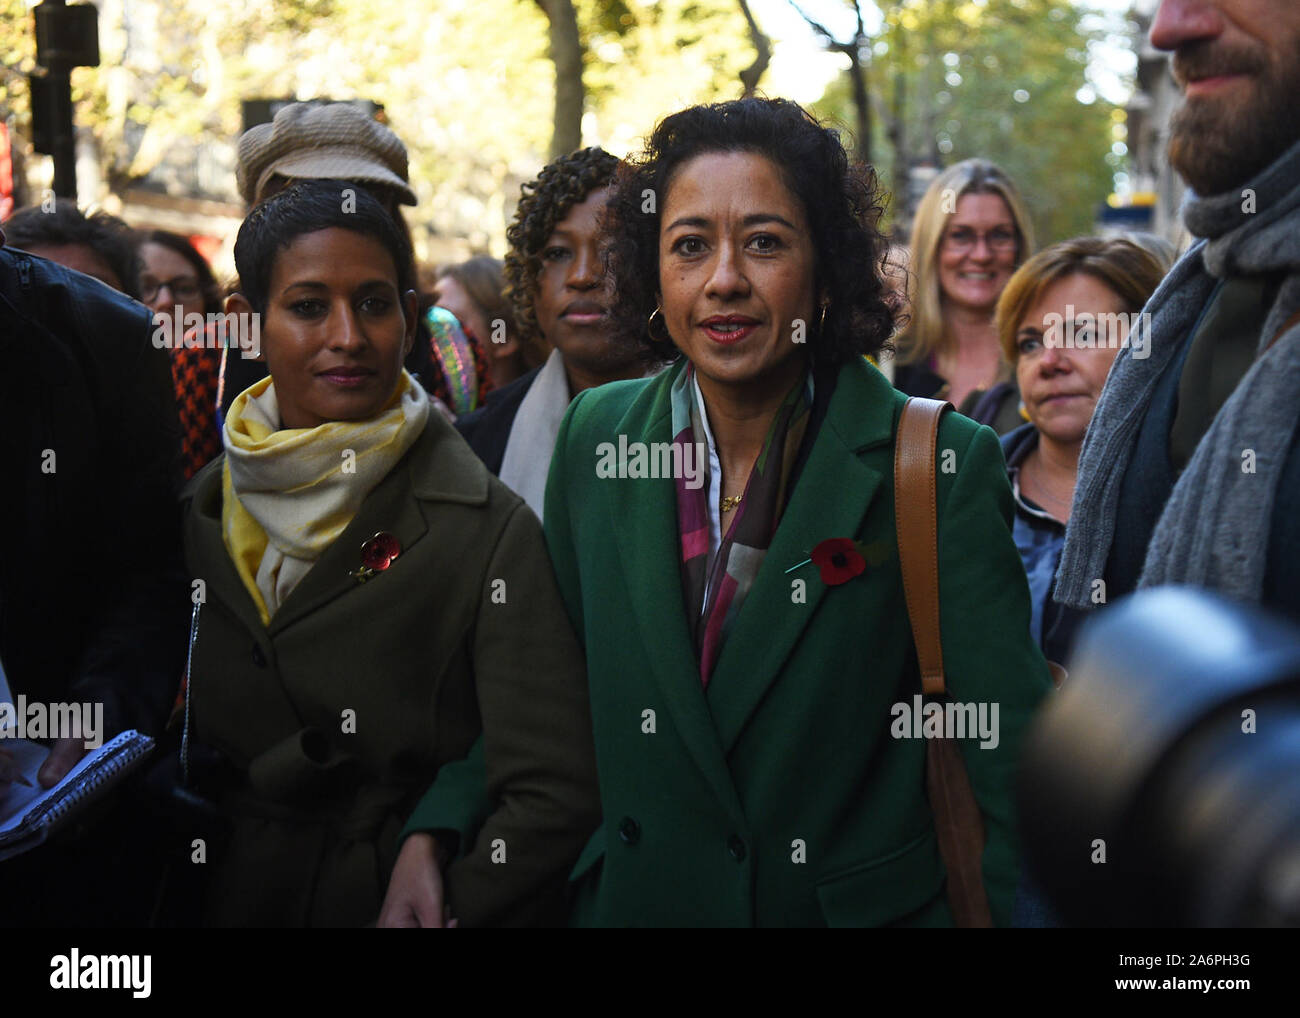 Journalist, writer and broadcaster Samira Ahmed (right) and Naga ...